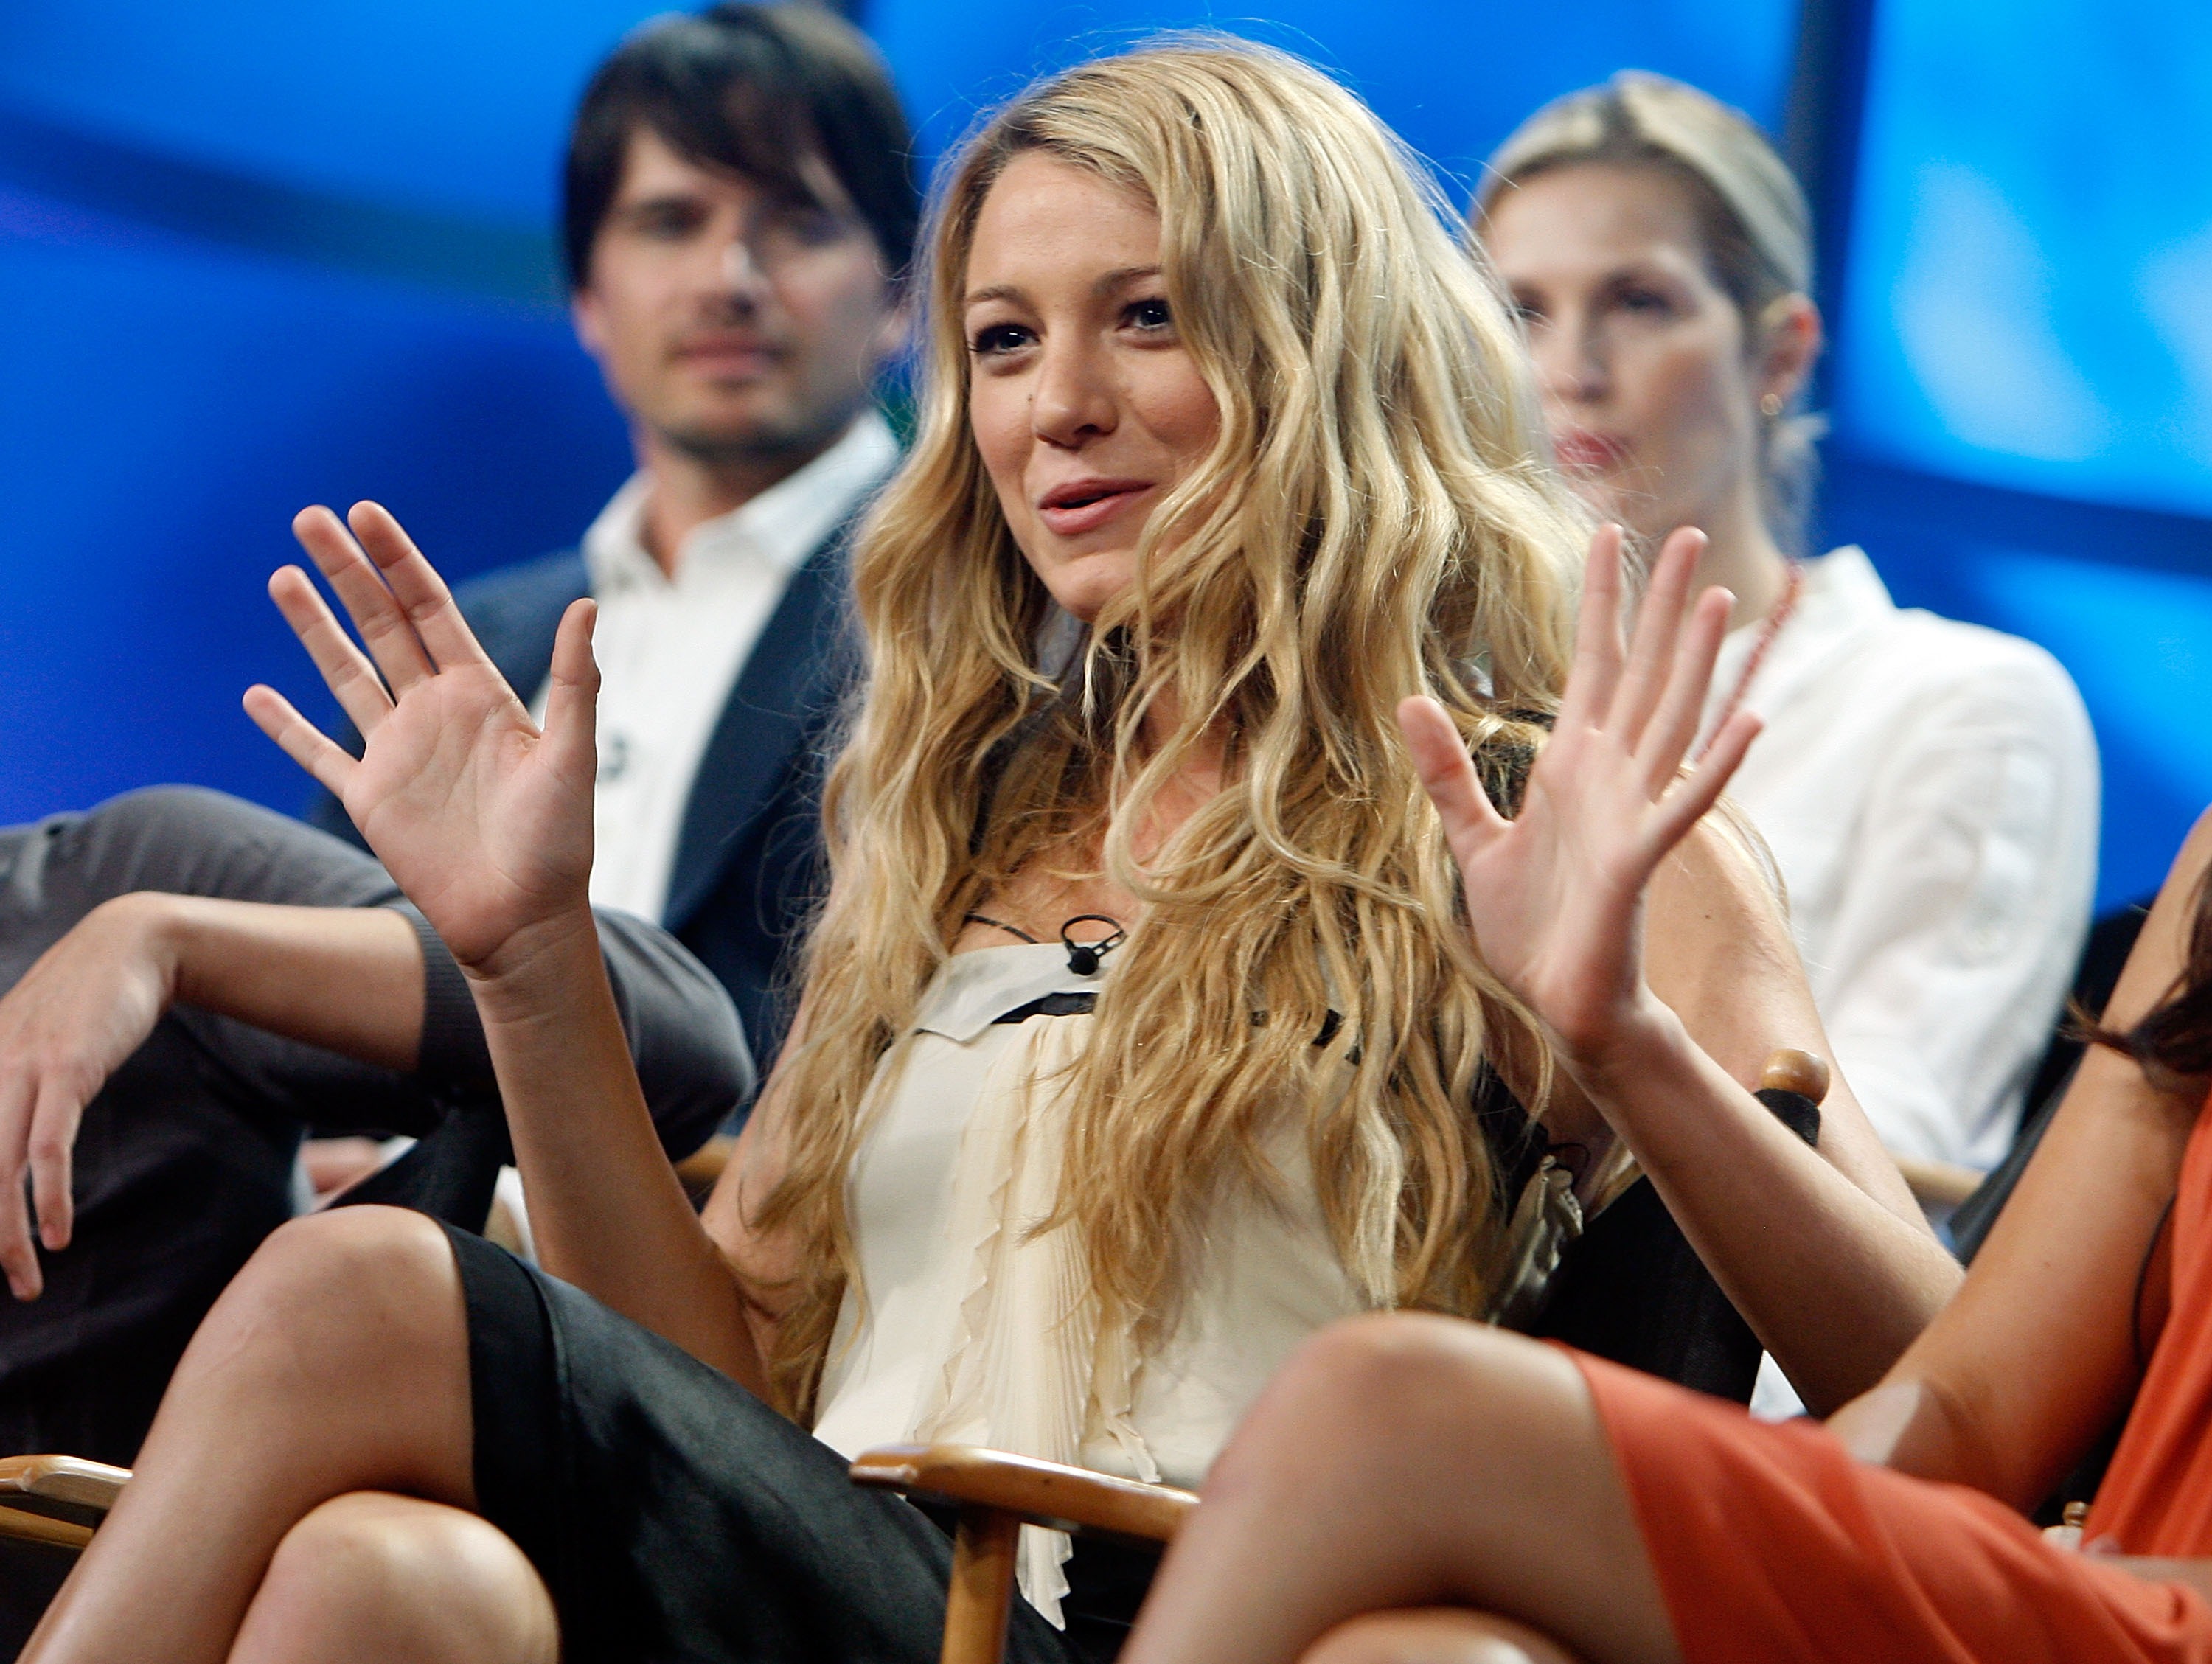 Blake Lively during the Television Critics Association Press Tour in 2007